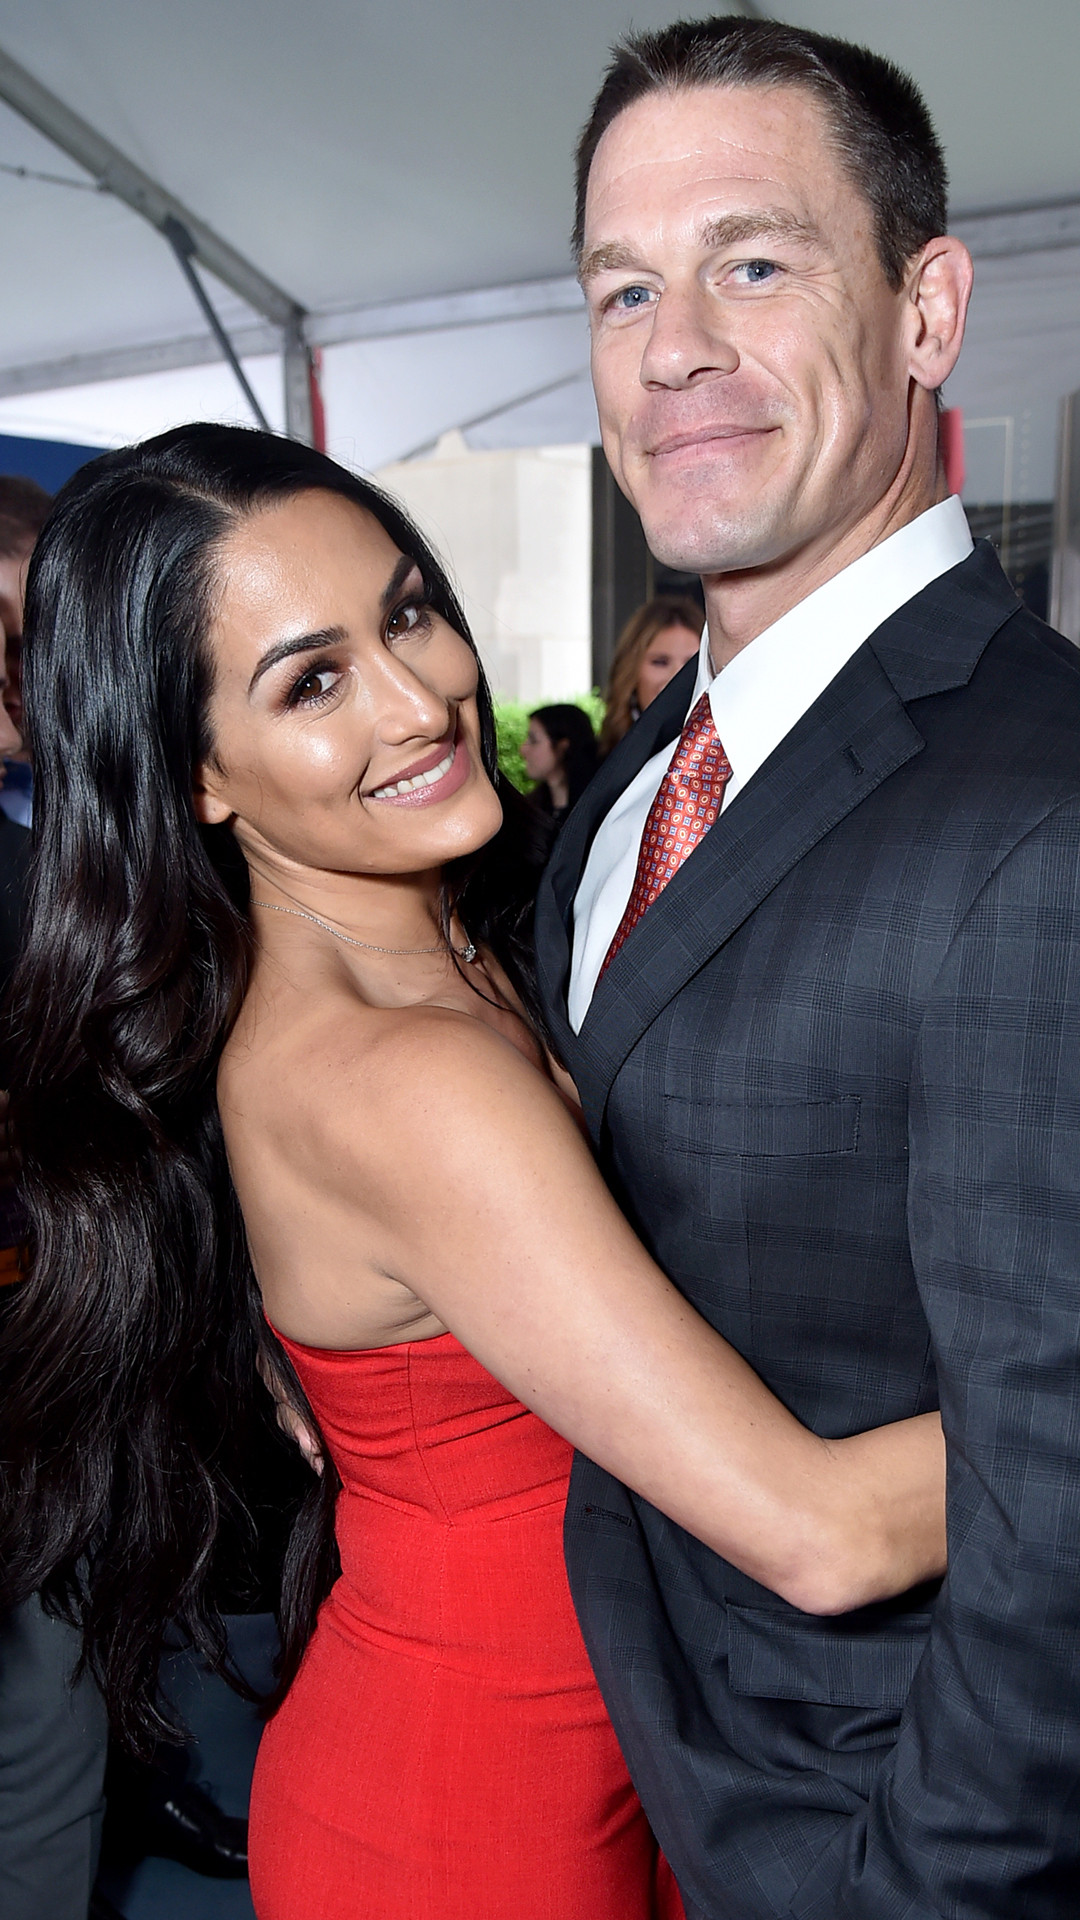 What's Next for Nikki Bella and John Cena After Their Split?